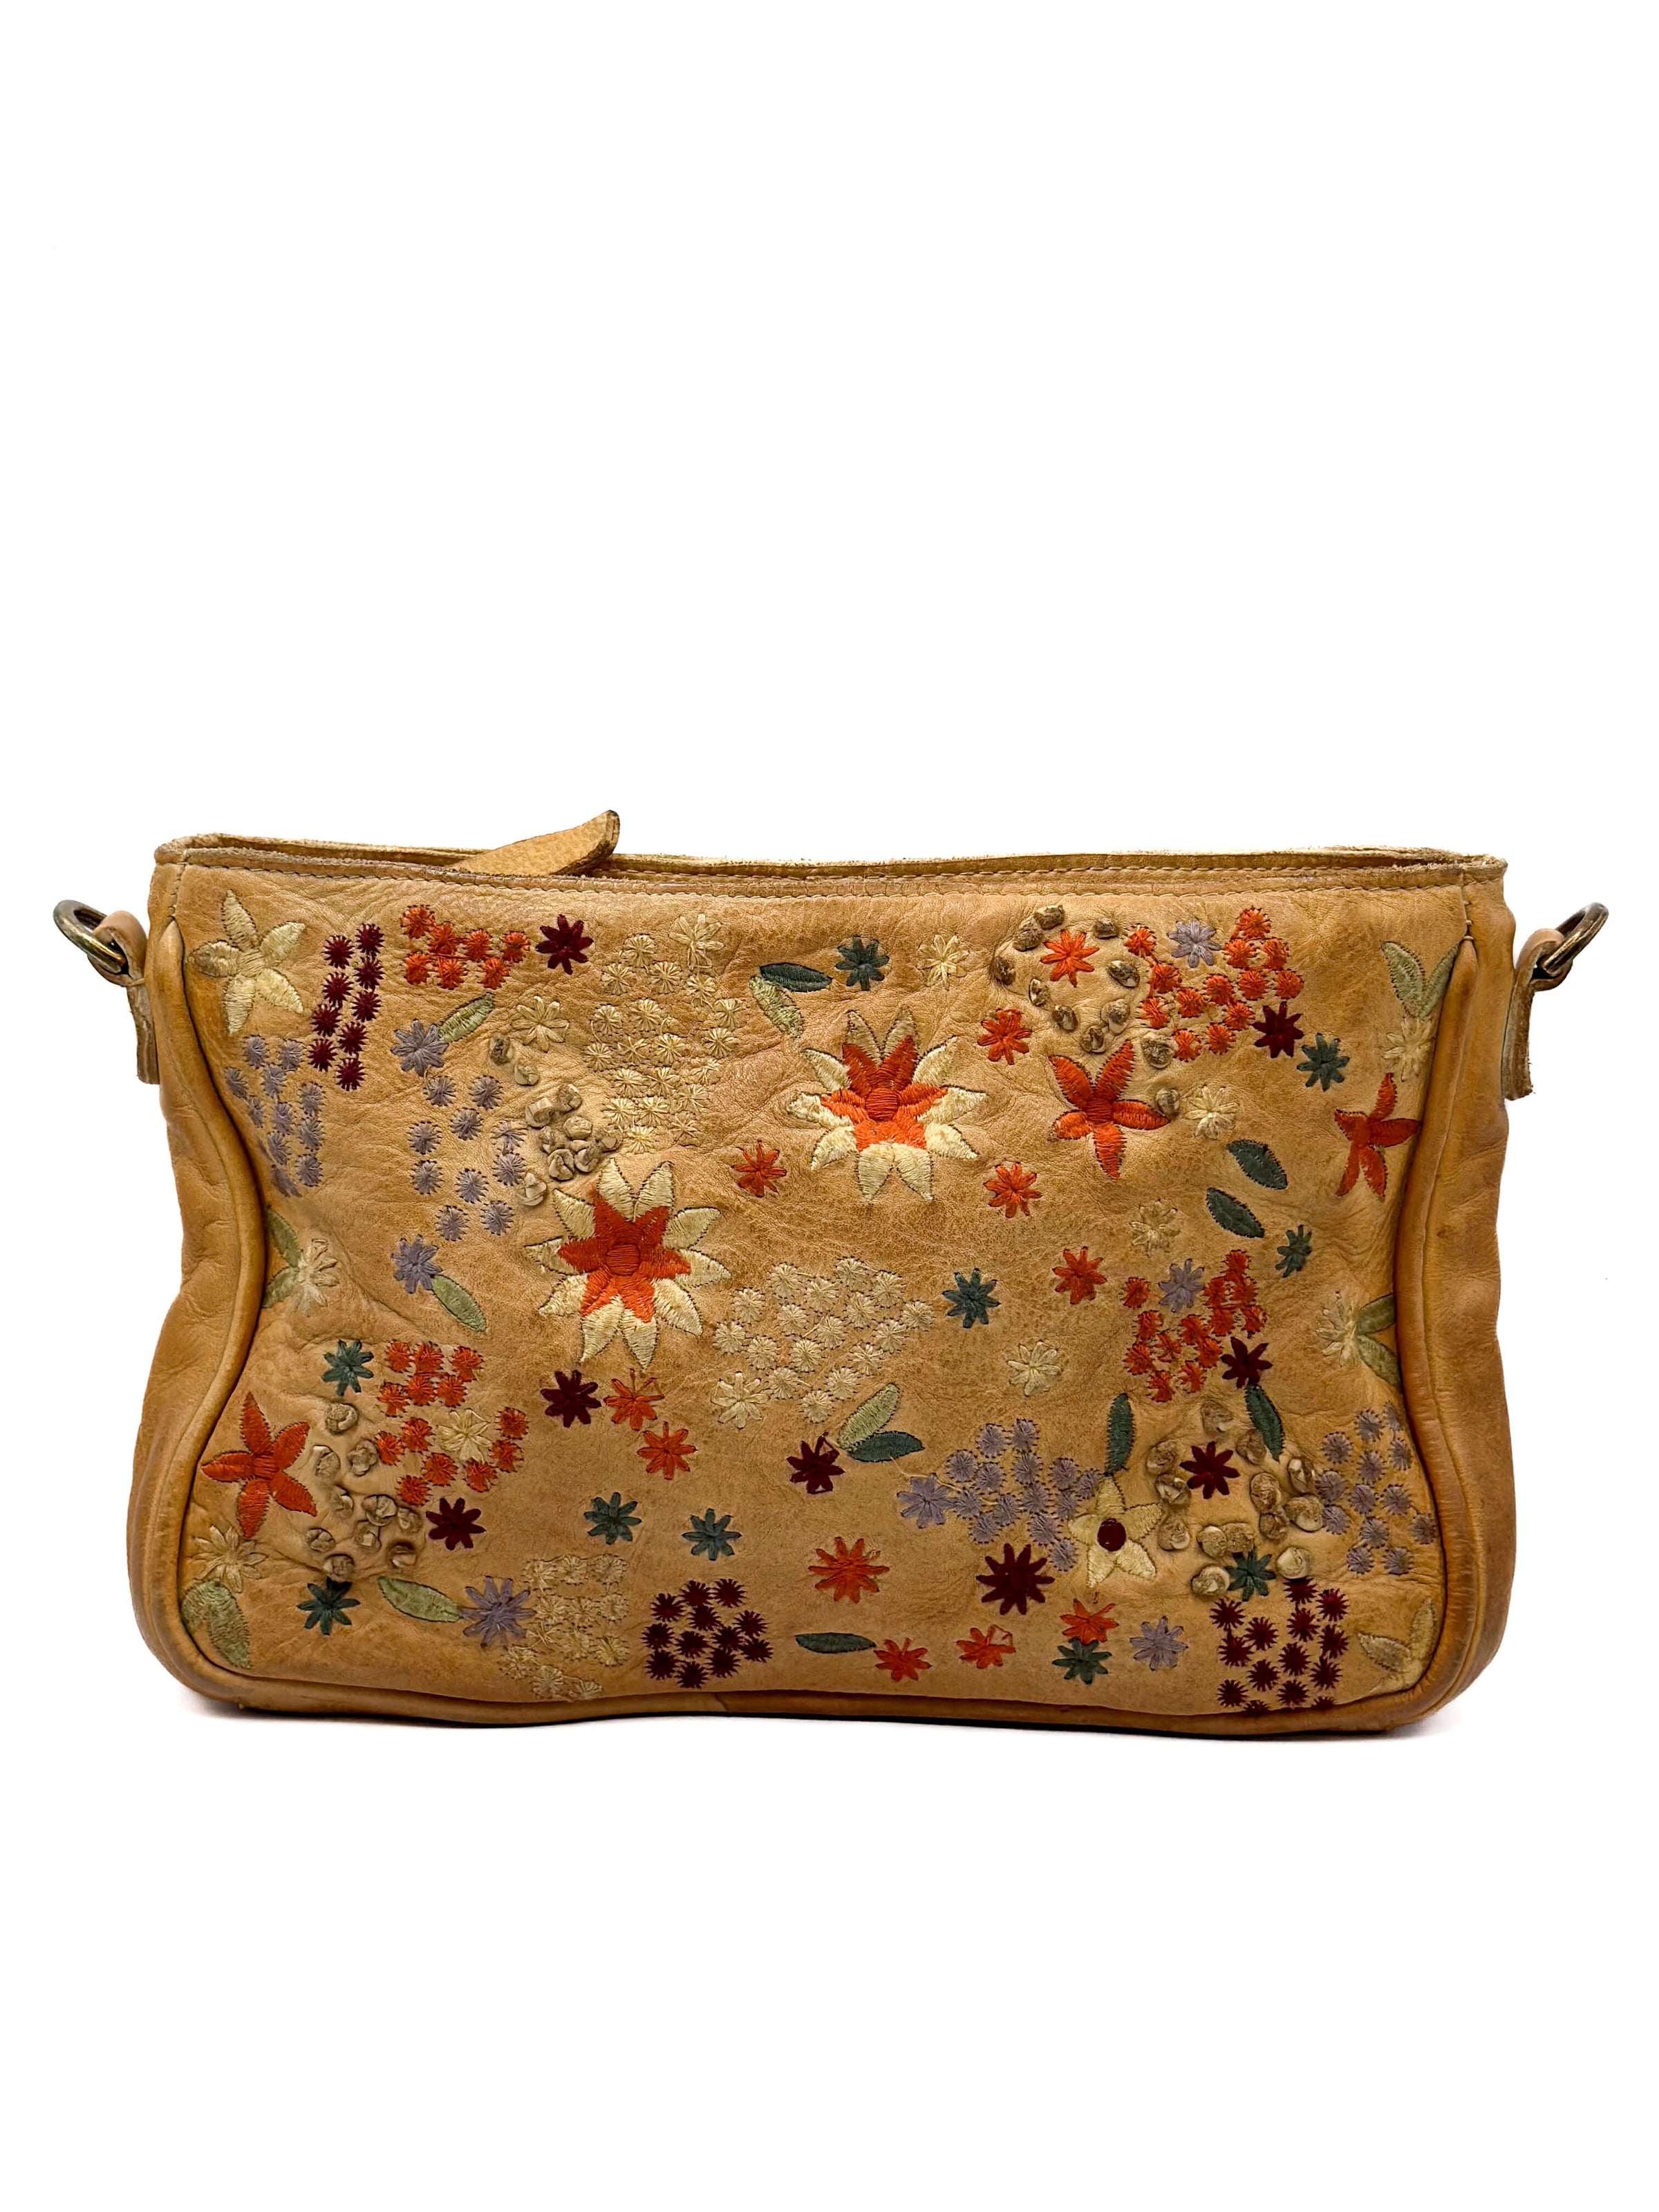 Latico Meadow Handcrafted Leather Crossbody in Mustard